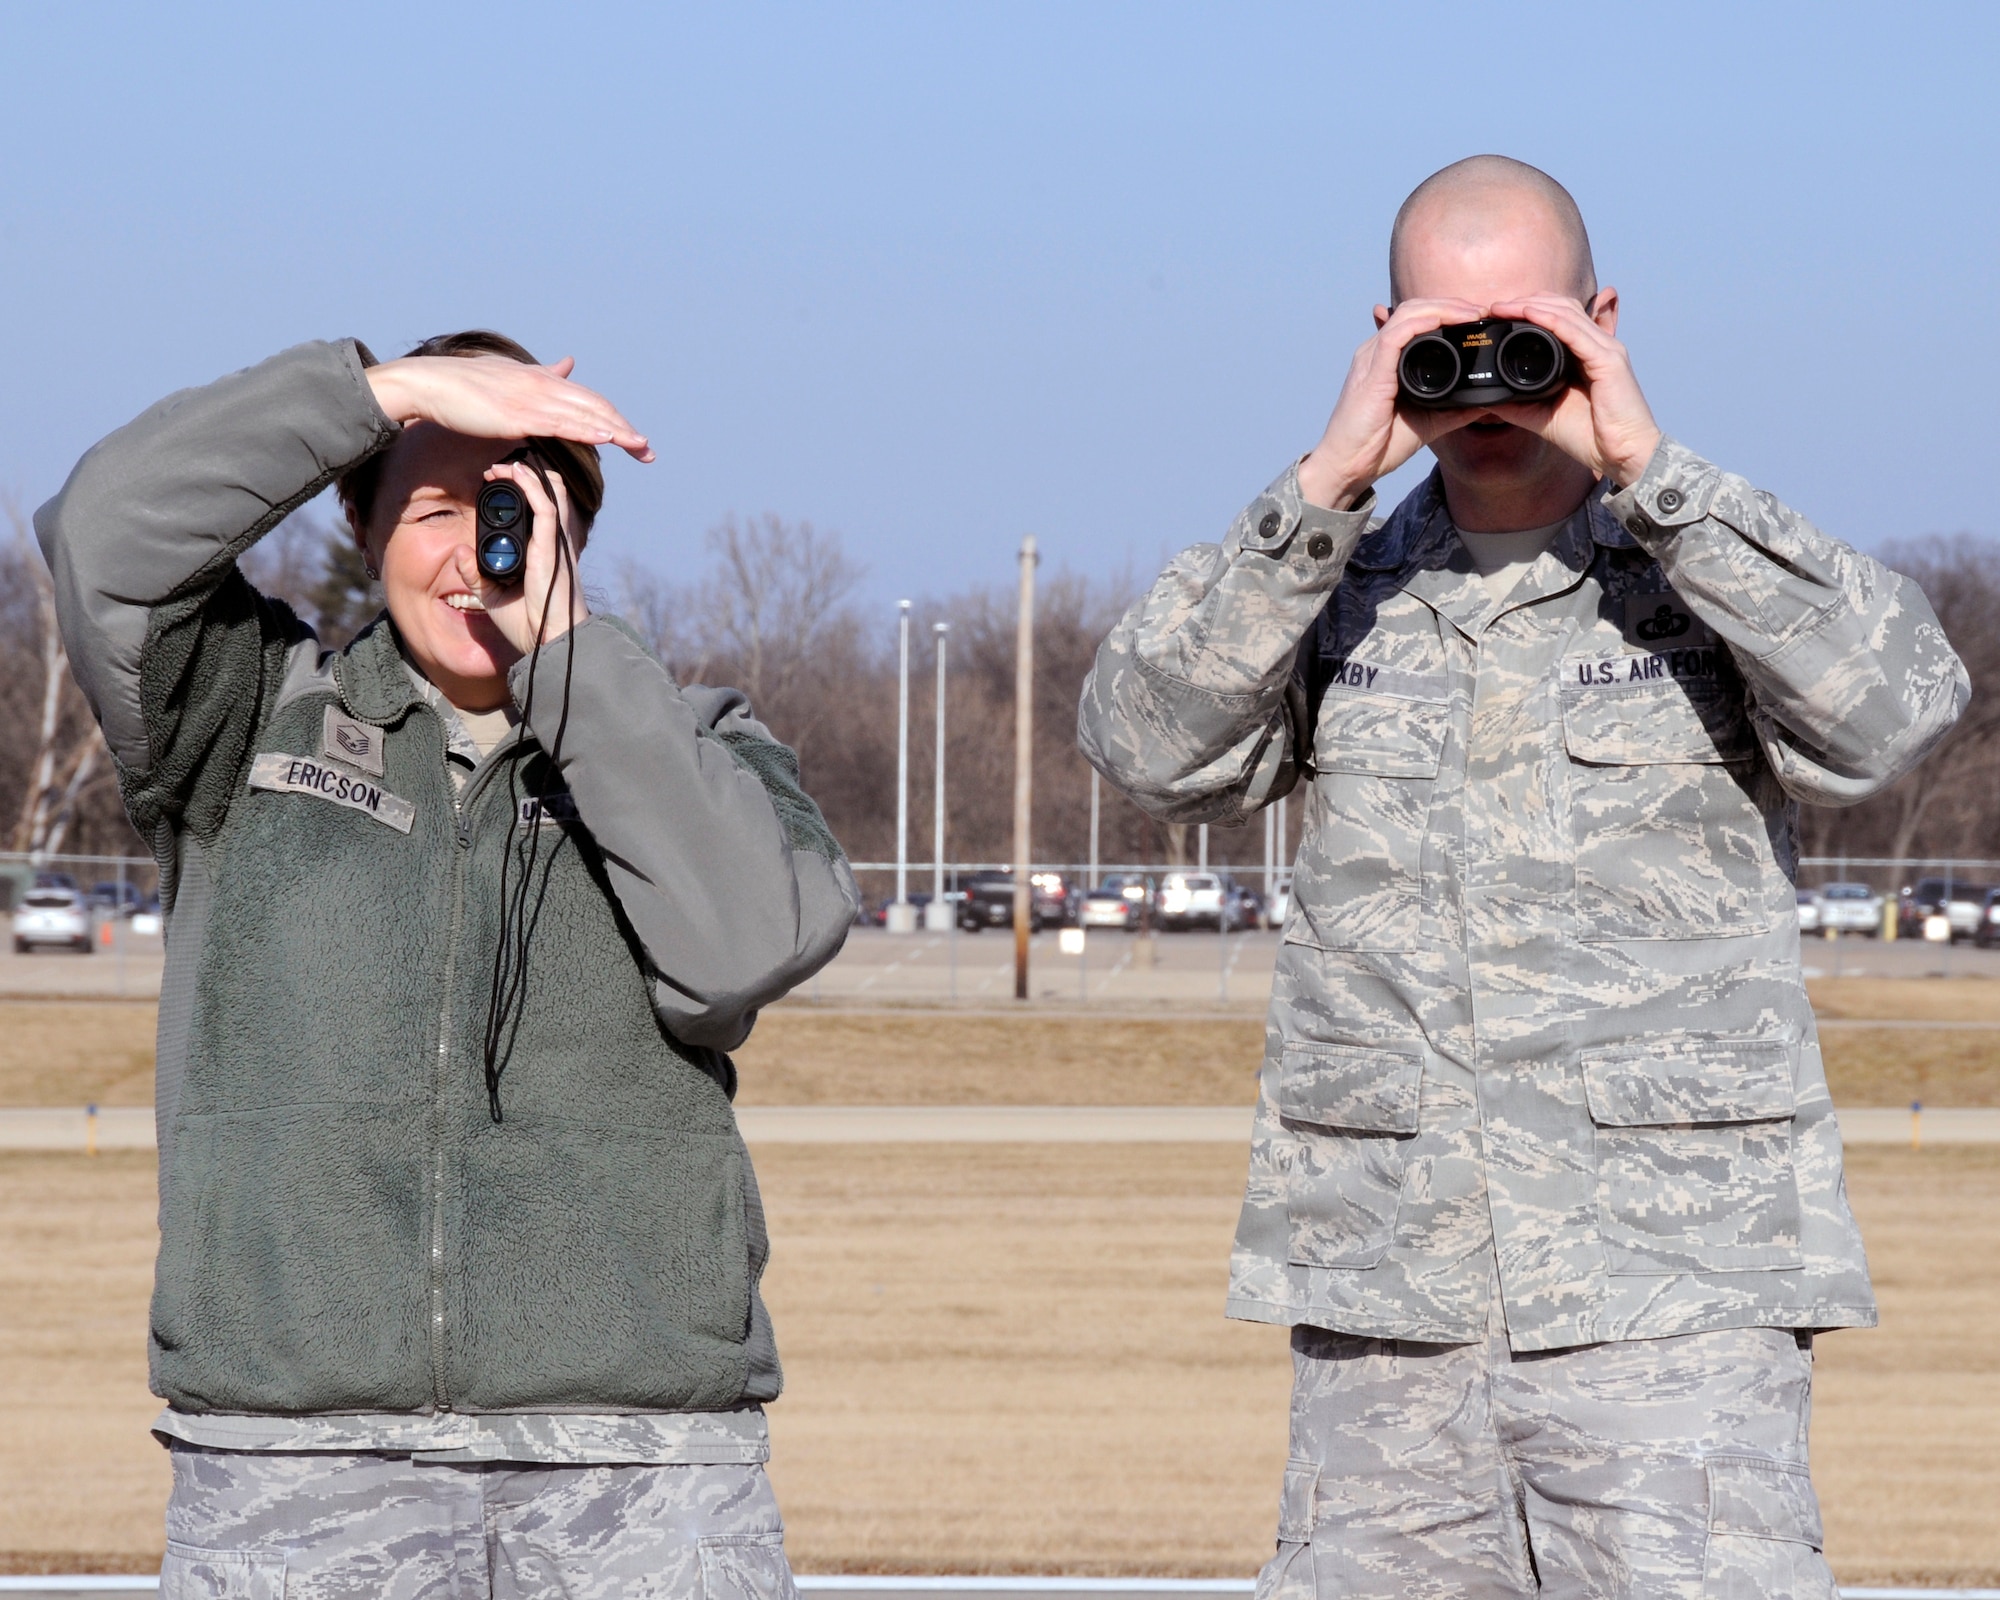 Master Sgt. Christina Ericson and Master Sgt. Brent Bixby from the 182nd Airlift Wing's Airfield Management office use a laser range finder and binoculars from the runway centerline to take the measurement of a communications antenna placed on the airfield of the General Wayne A. Downing International Airport in Peoria, Ill. Feb. 7, 2016. (U.S. Air National Guard photo  by Tech. Sgt. Todd Pendleton)